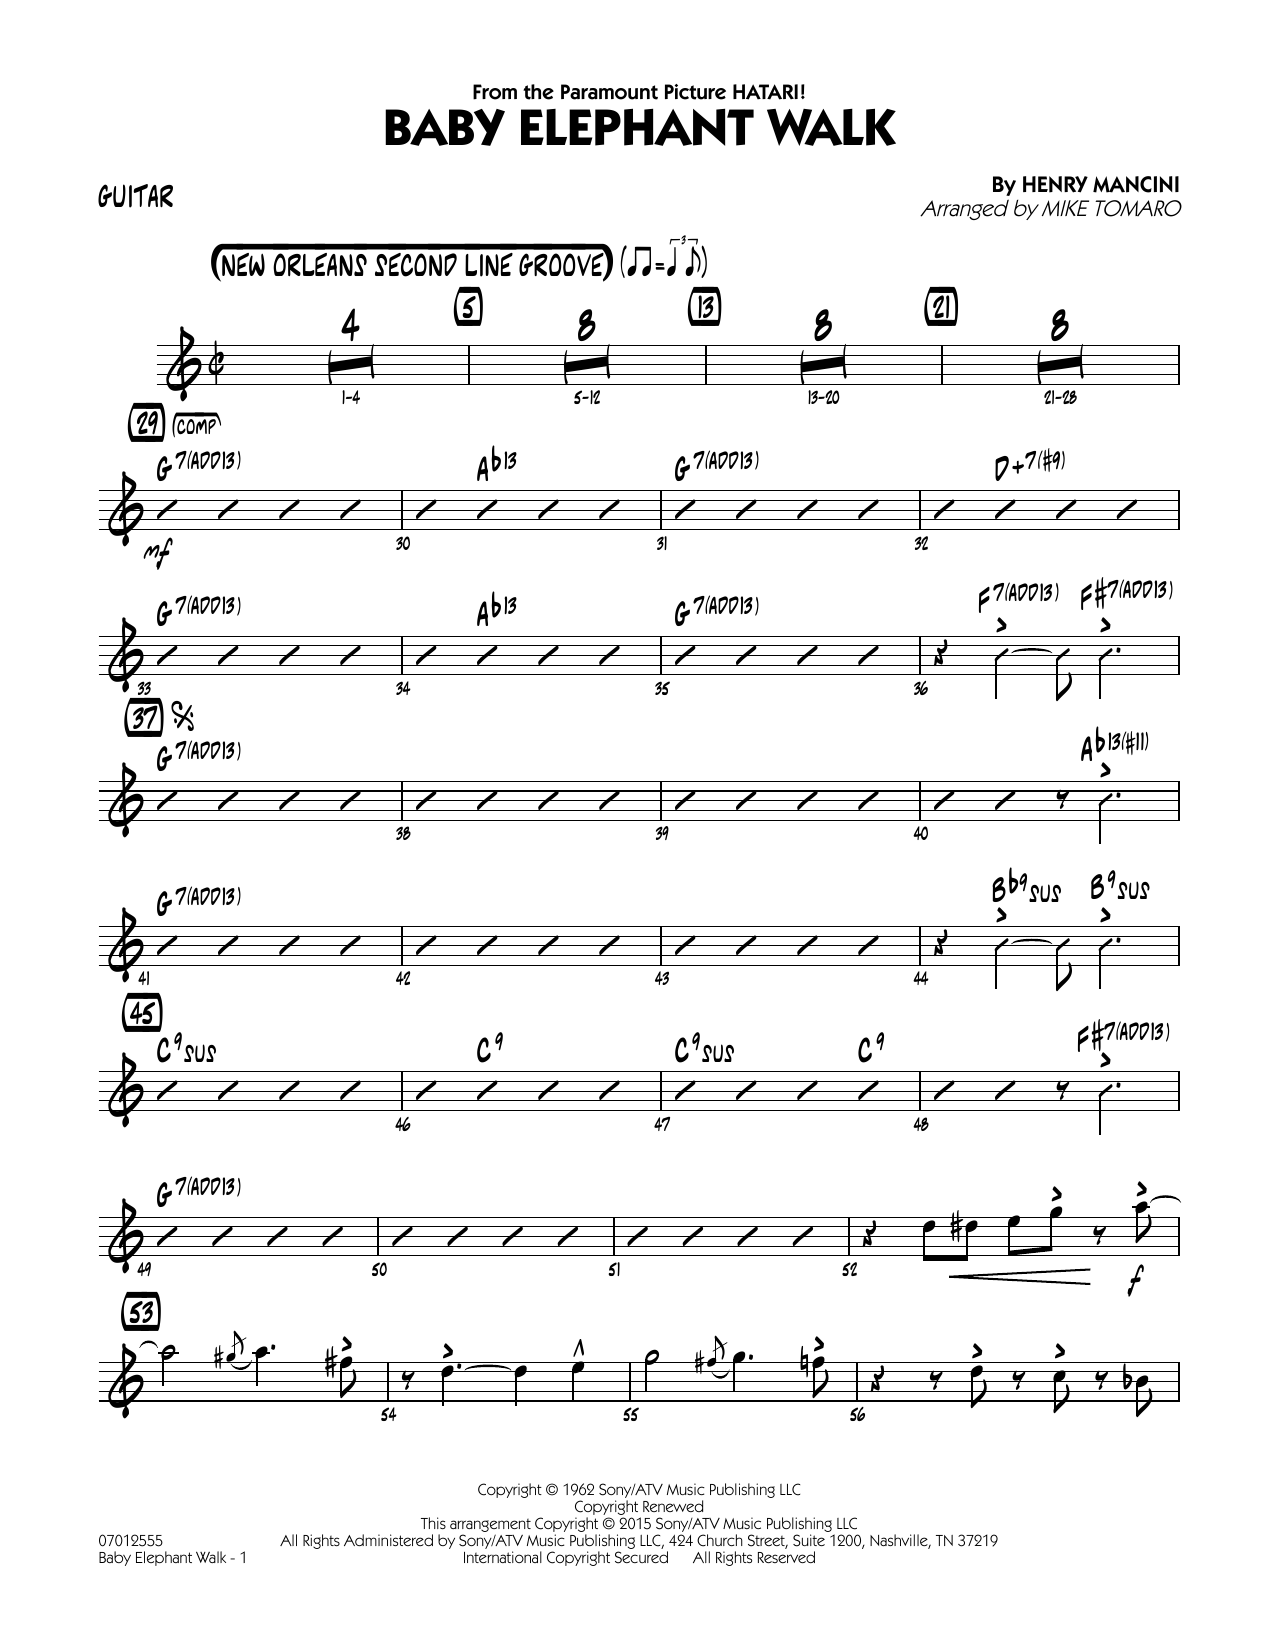 Mike Tomaro Baby Elephant Walk - Guitar sheet music notes and chords. Download Printable PDF.